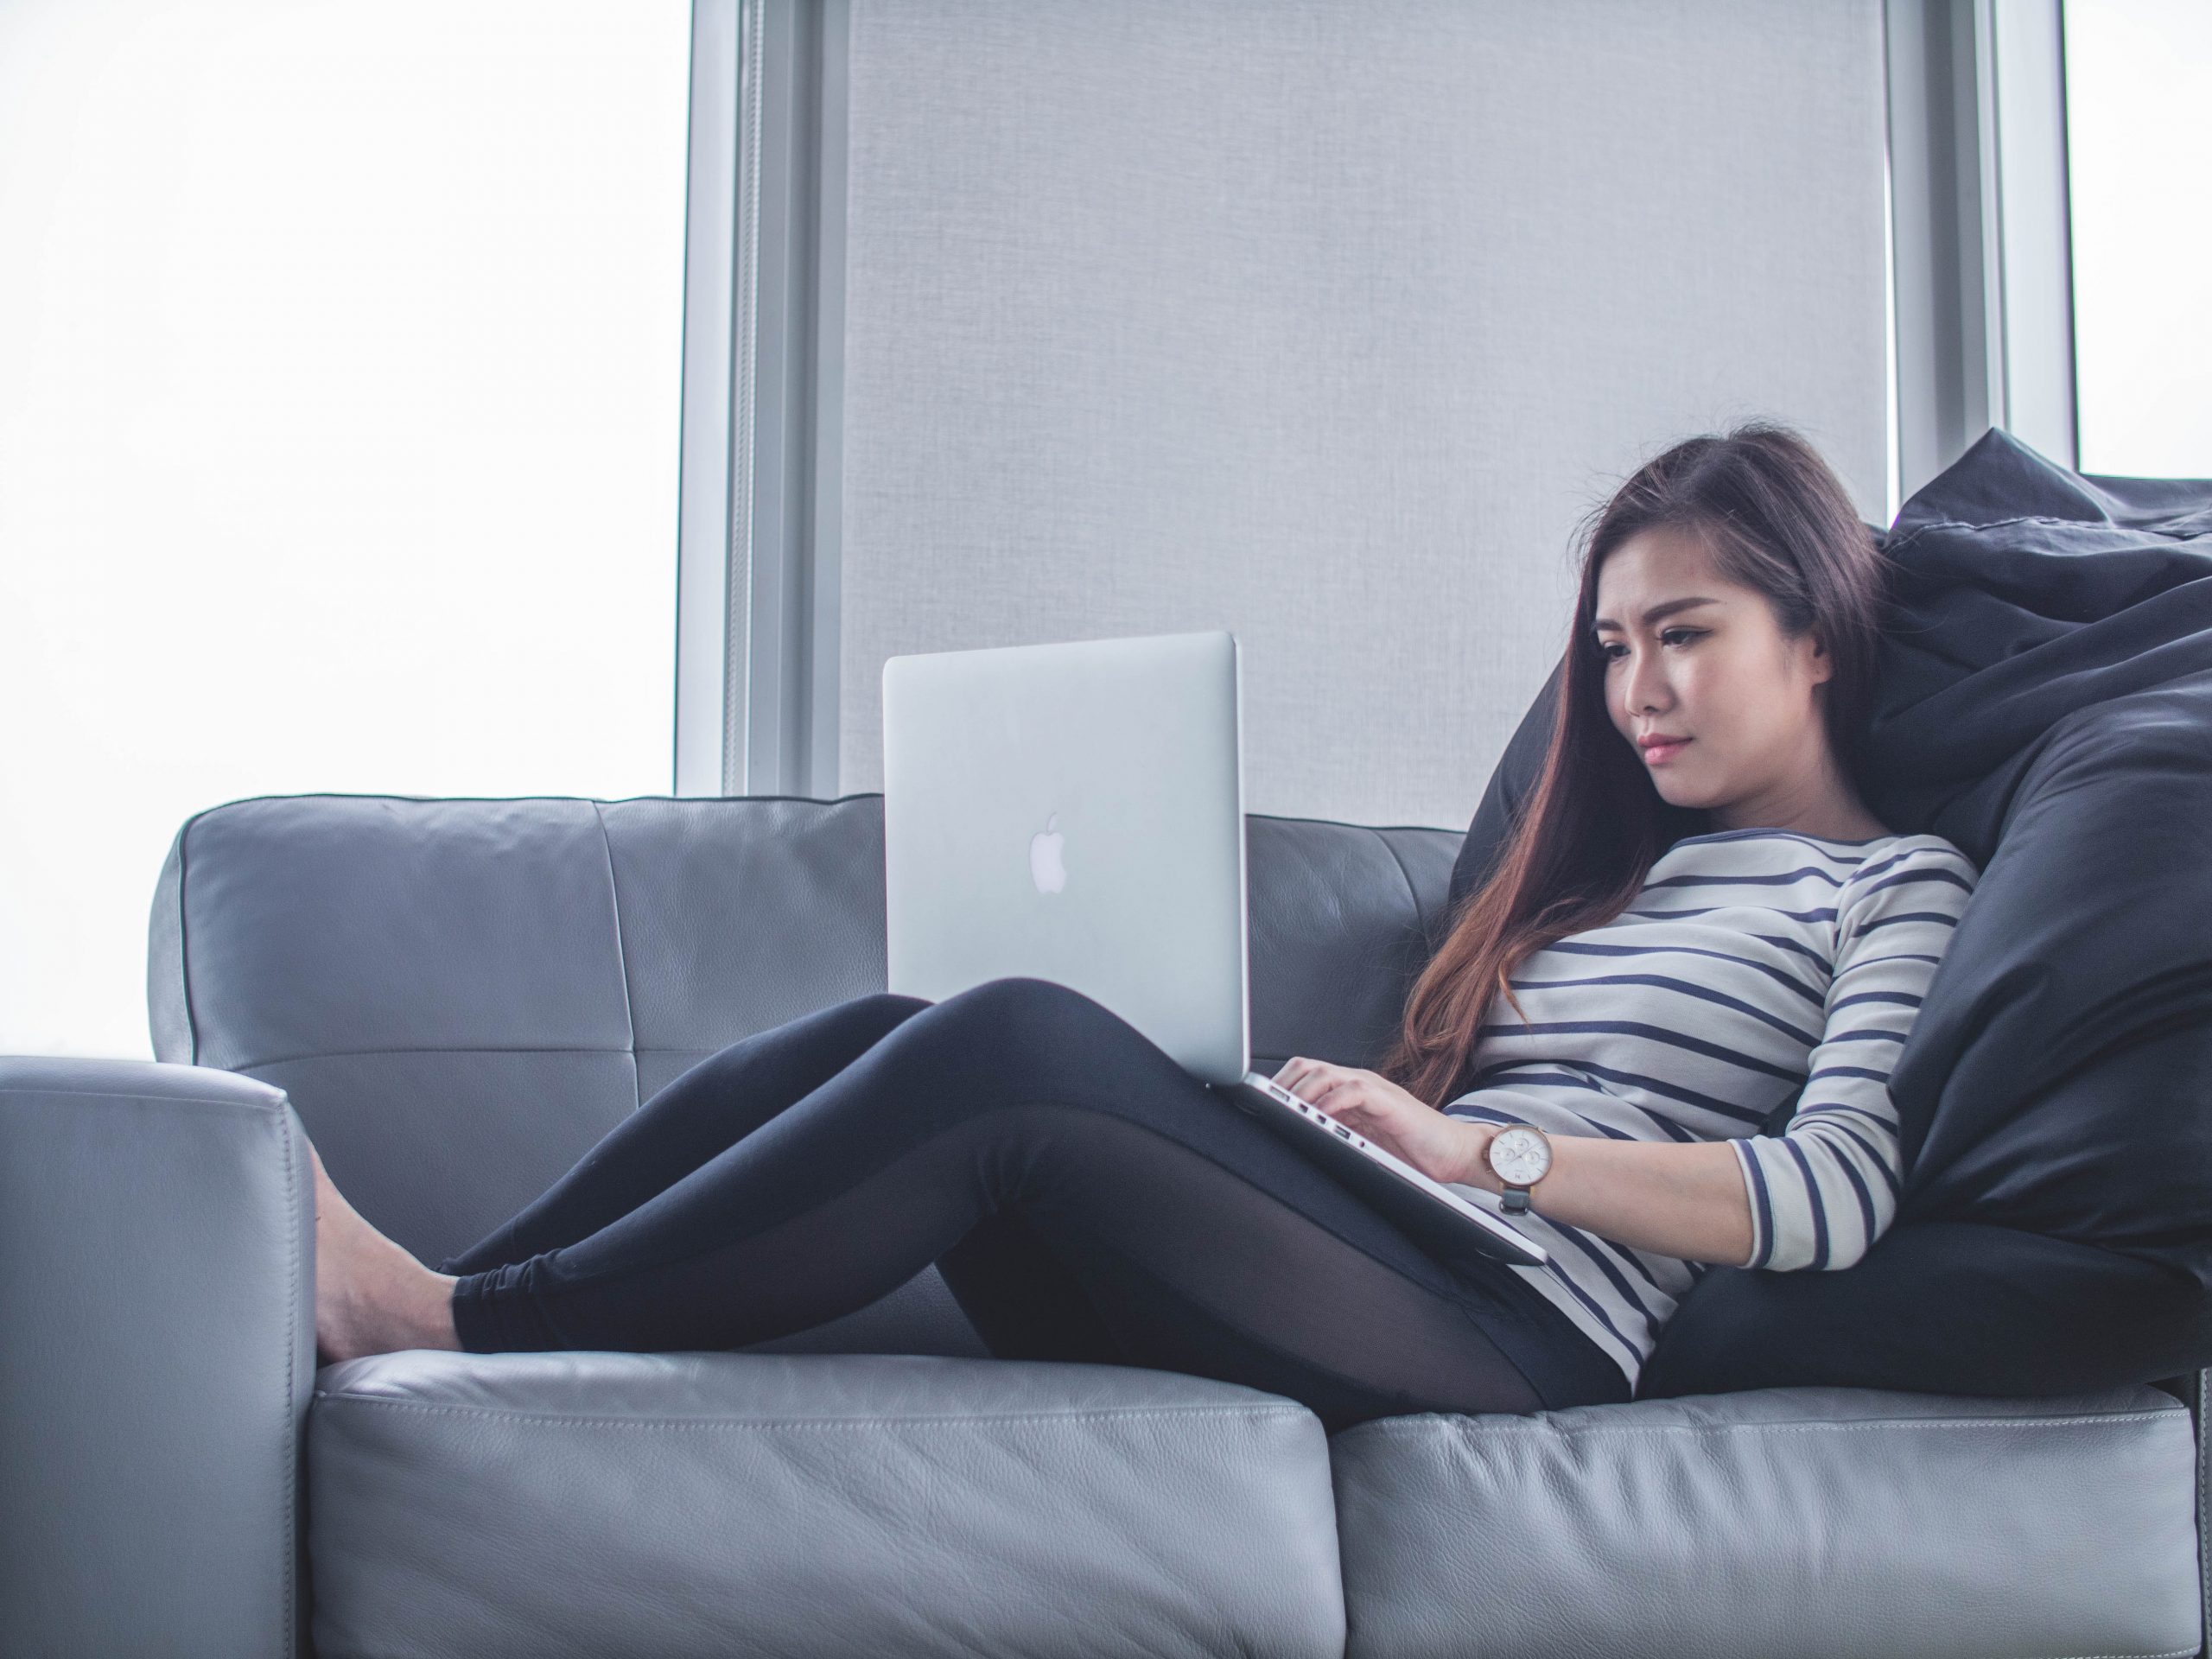 Where to Find Legit Work From Home Jobs